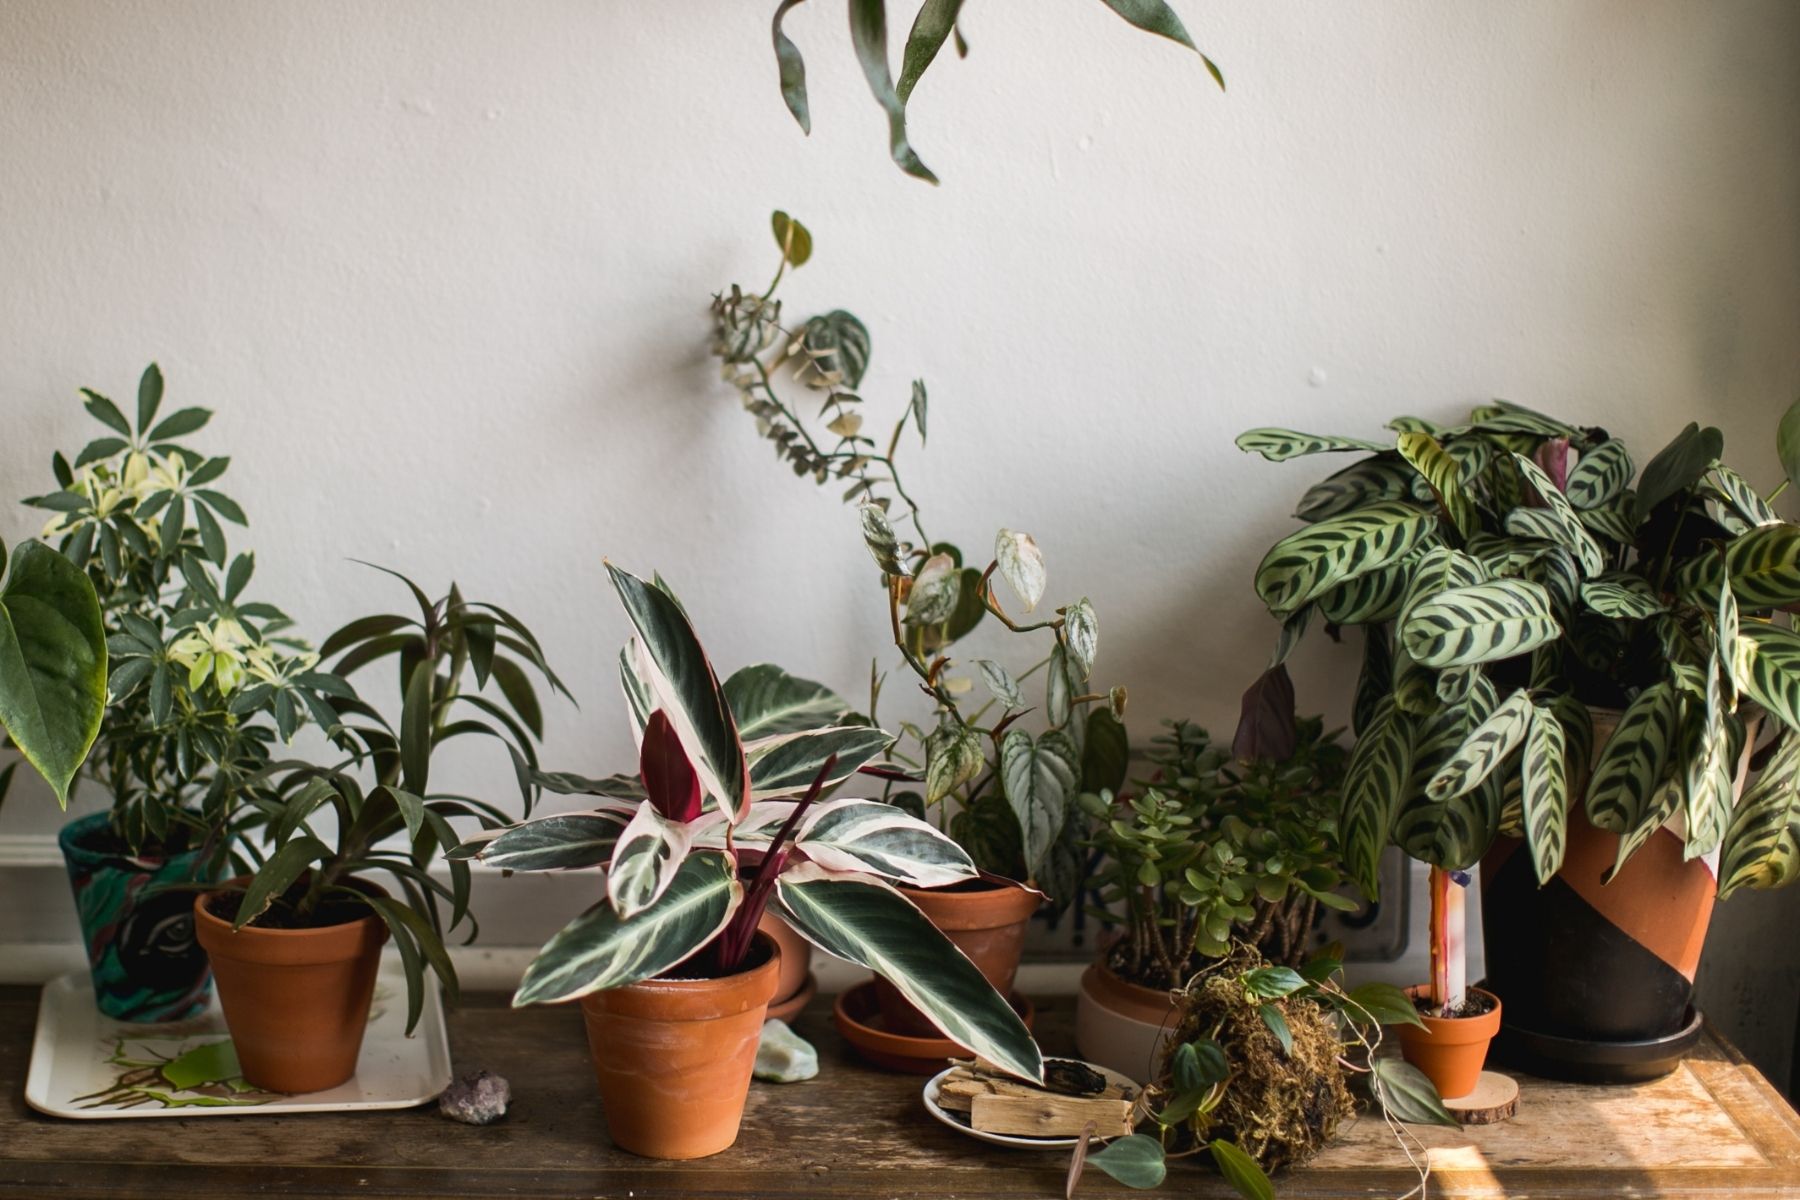 How To Keep Outdoor Potted Plants Alive In Winter